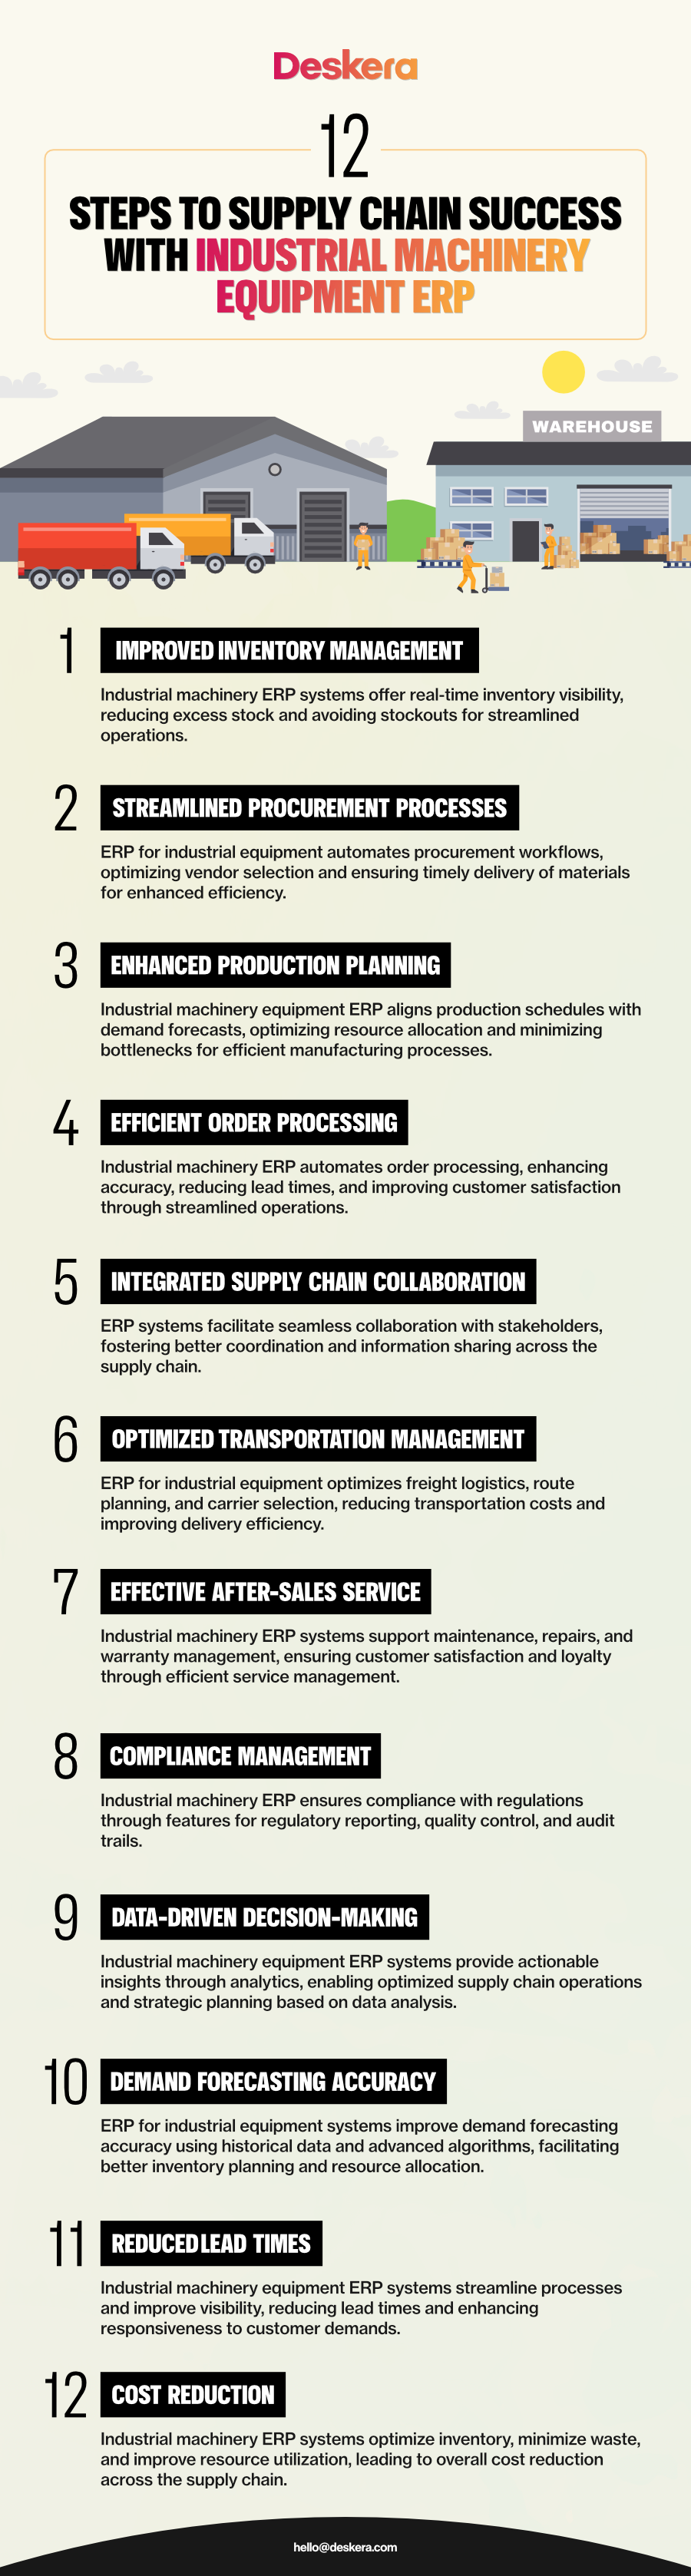 12 steps to supply chain success with industrial machinery equipment ERP helps are reduced lead times, cost reduction, improved inventory management, integrated supply chain collaboration, and more.